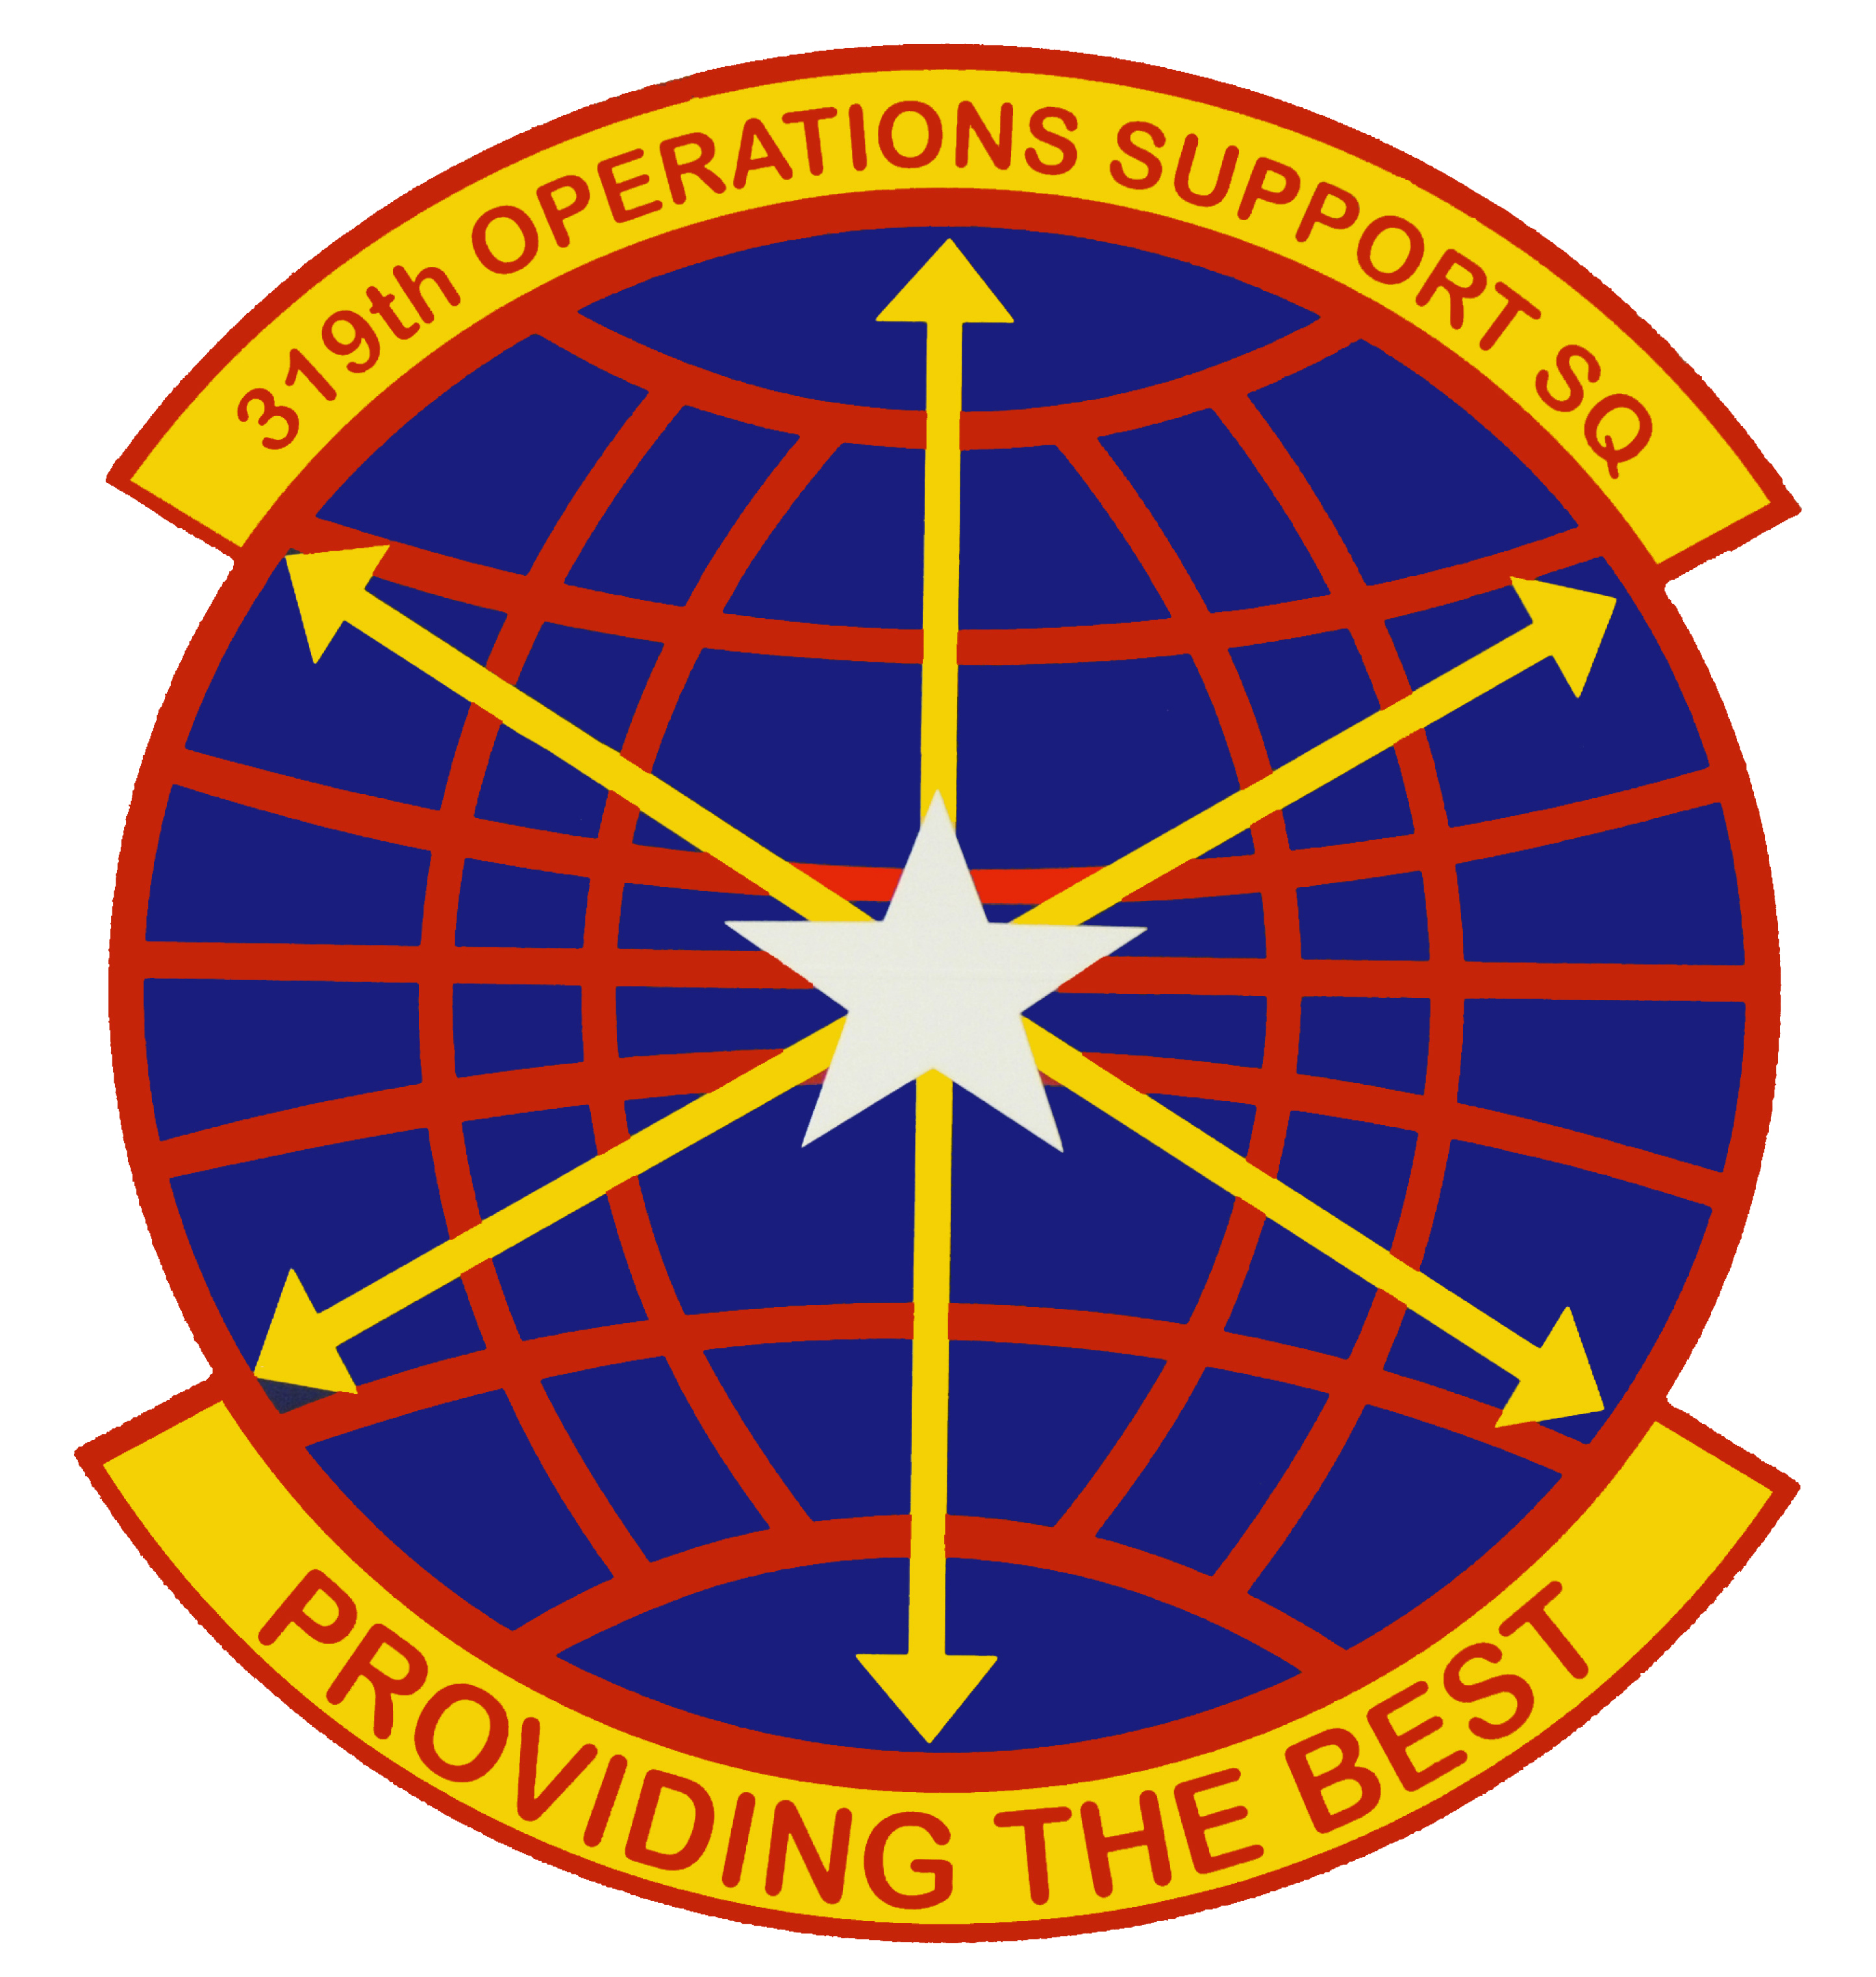 This is an image of the 319th Operations Support Squadron's seal.